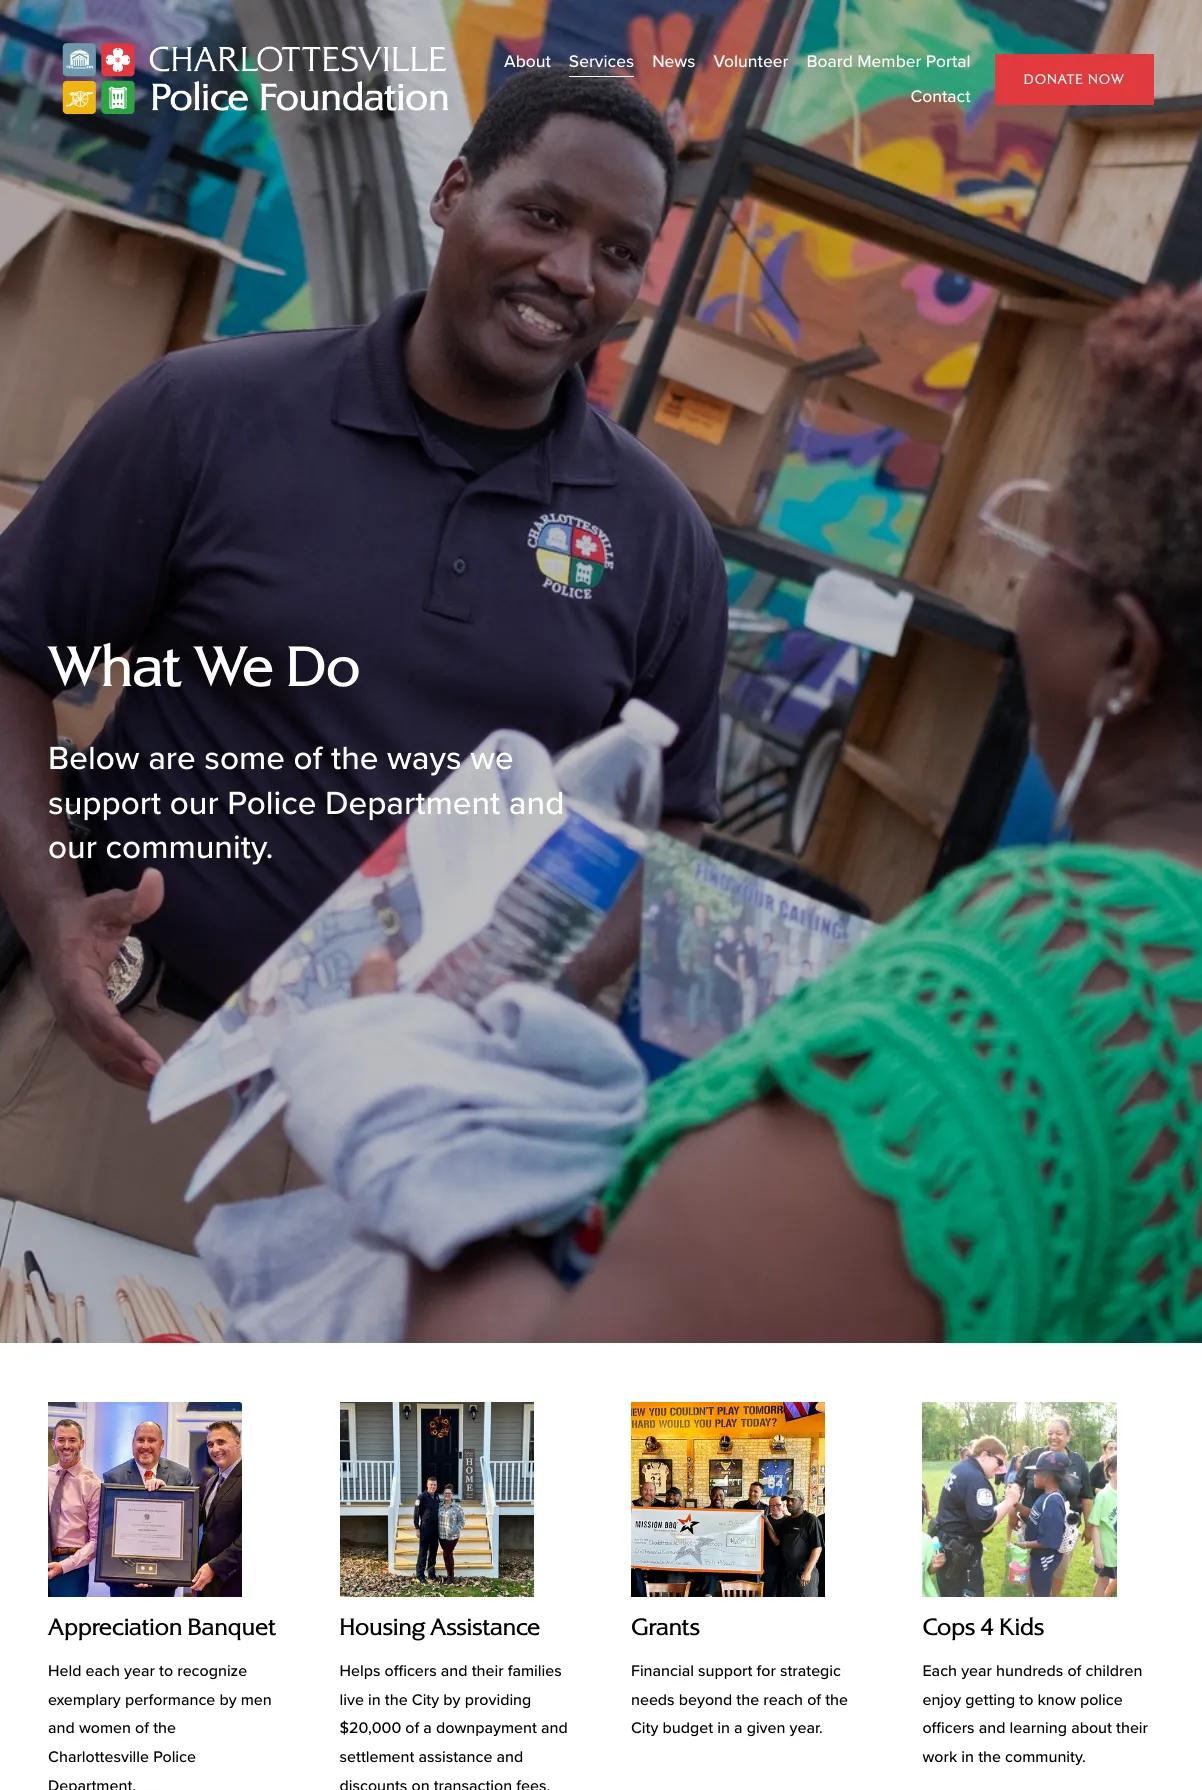 Screenshot 2 of Charlottesville Police Foundation (Example Squarespace Nonprofit Website)